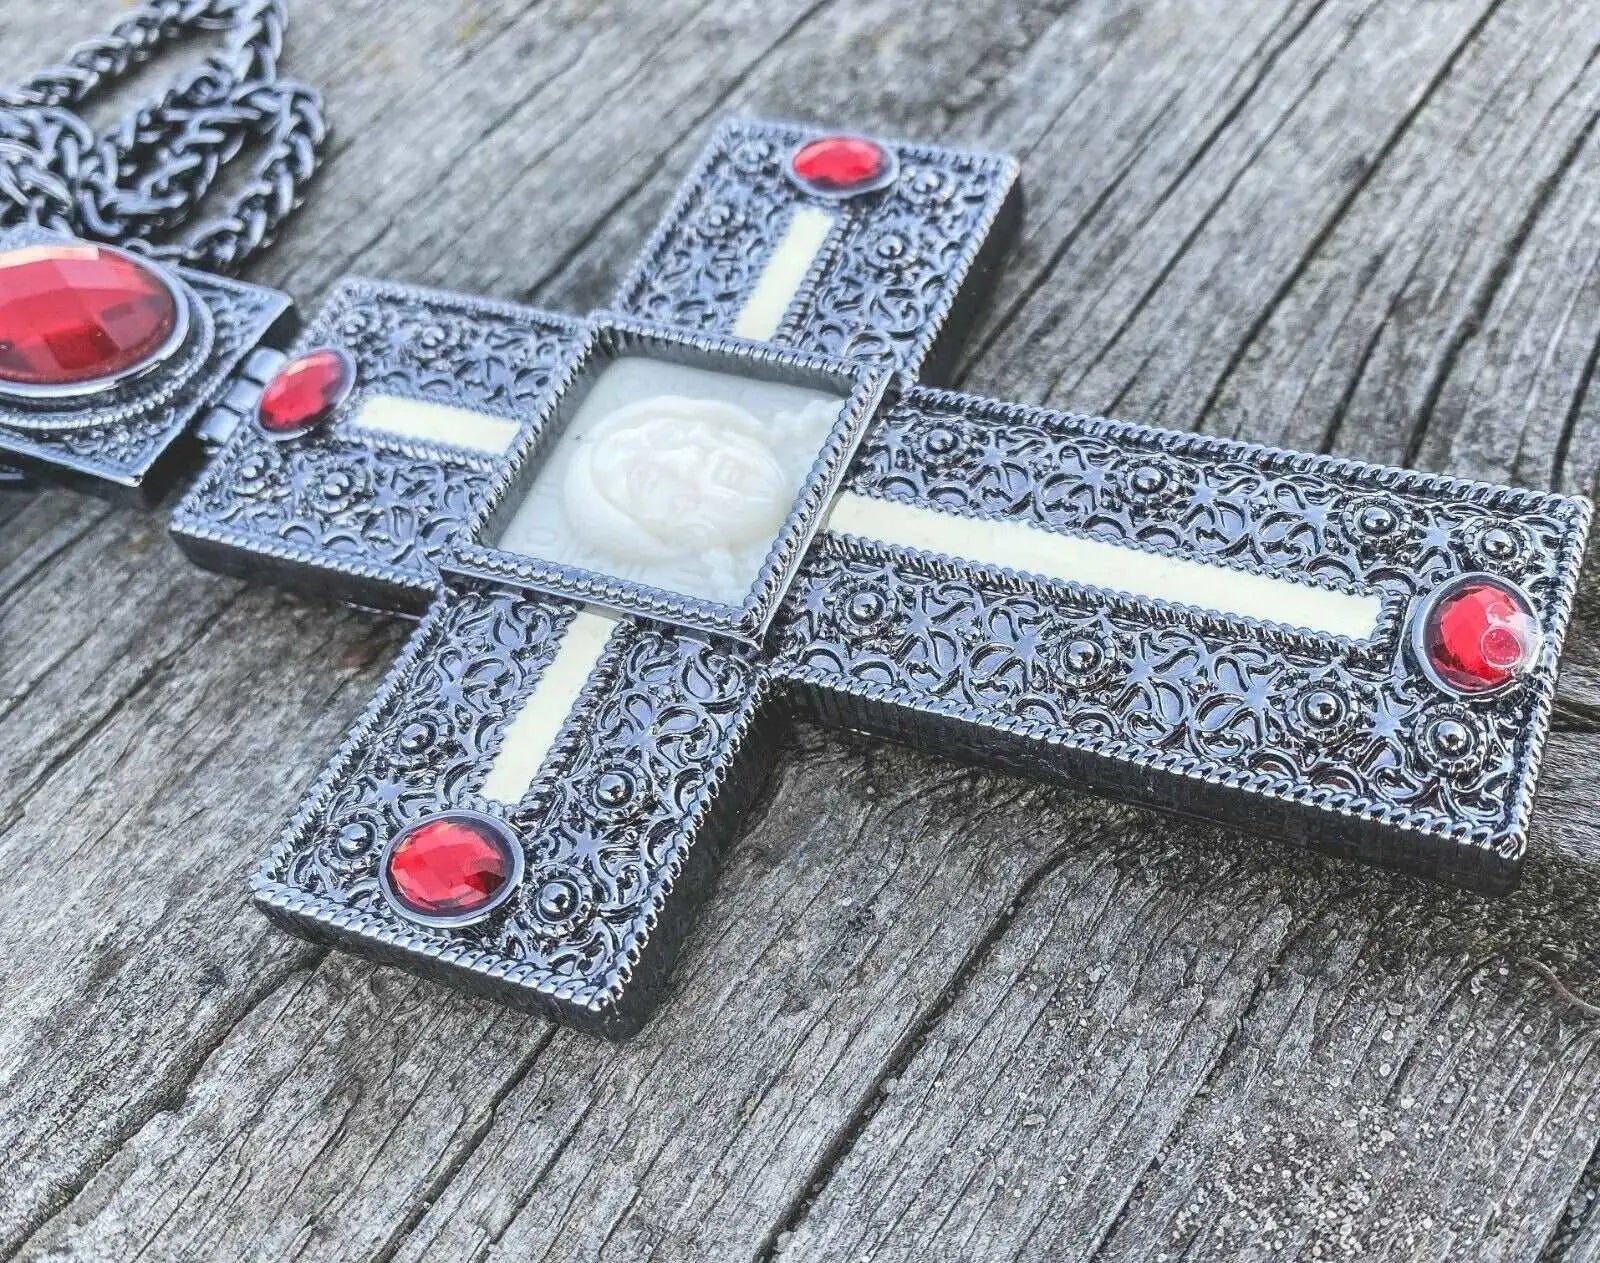 Ox Silver Pectoral Cross Red Crystallized Glass Priest Bishop Clergy Crucifix Nazareth Store